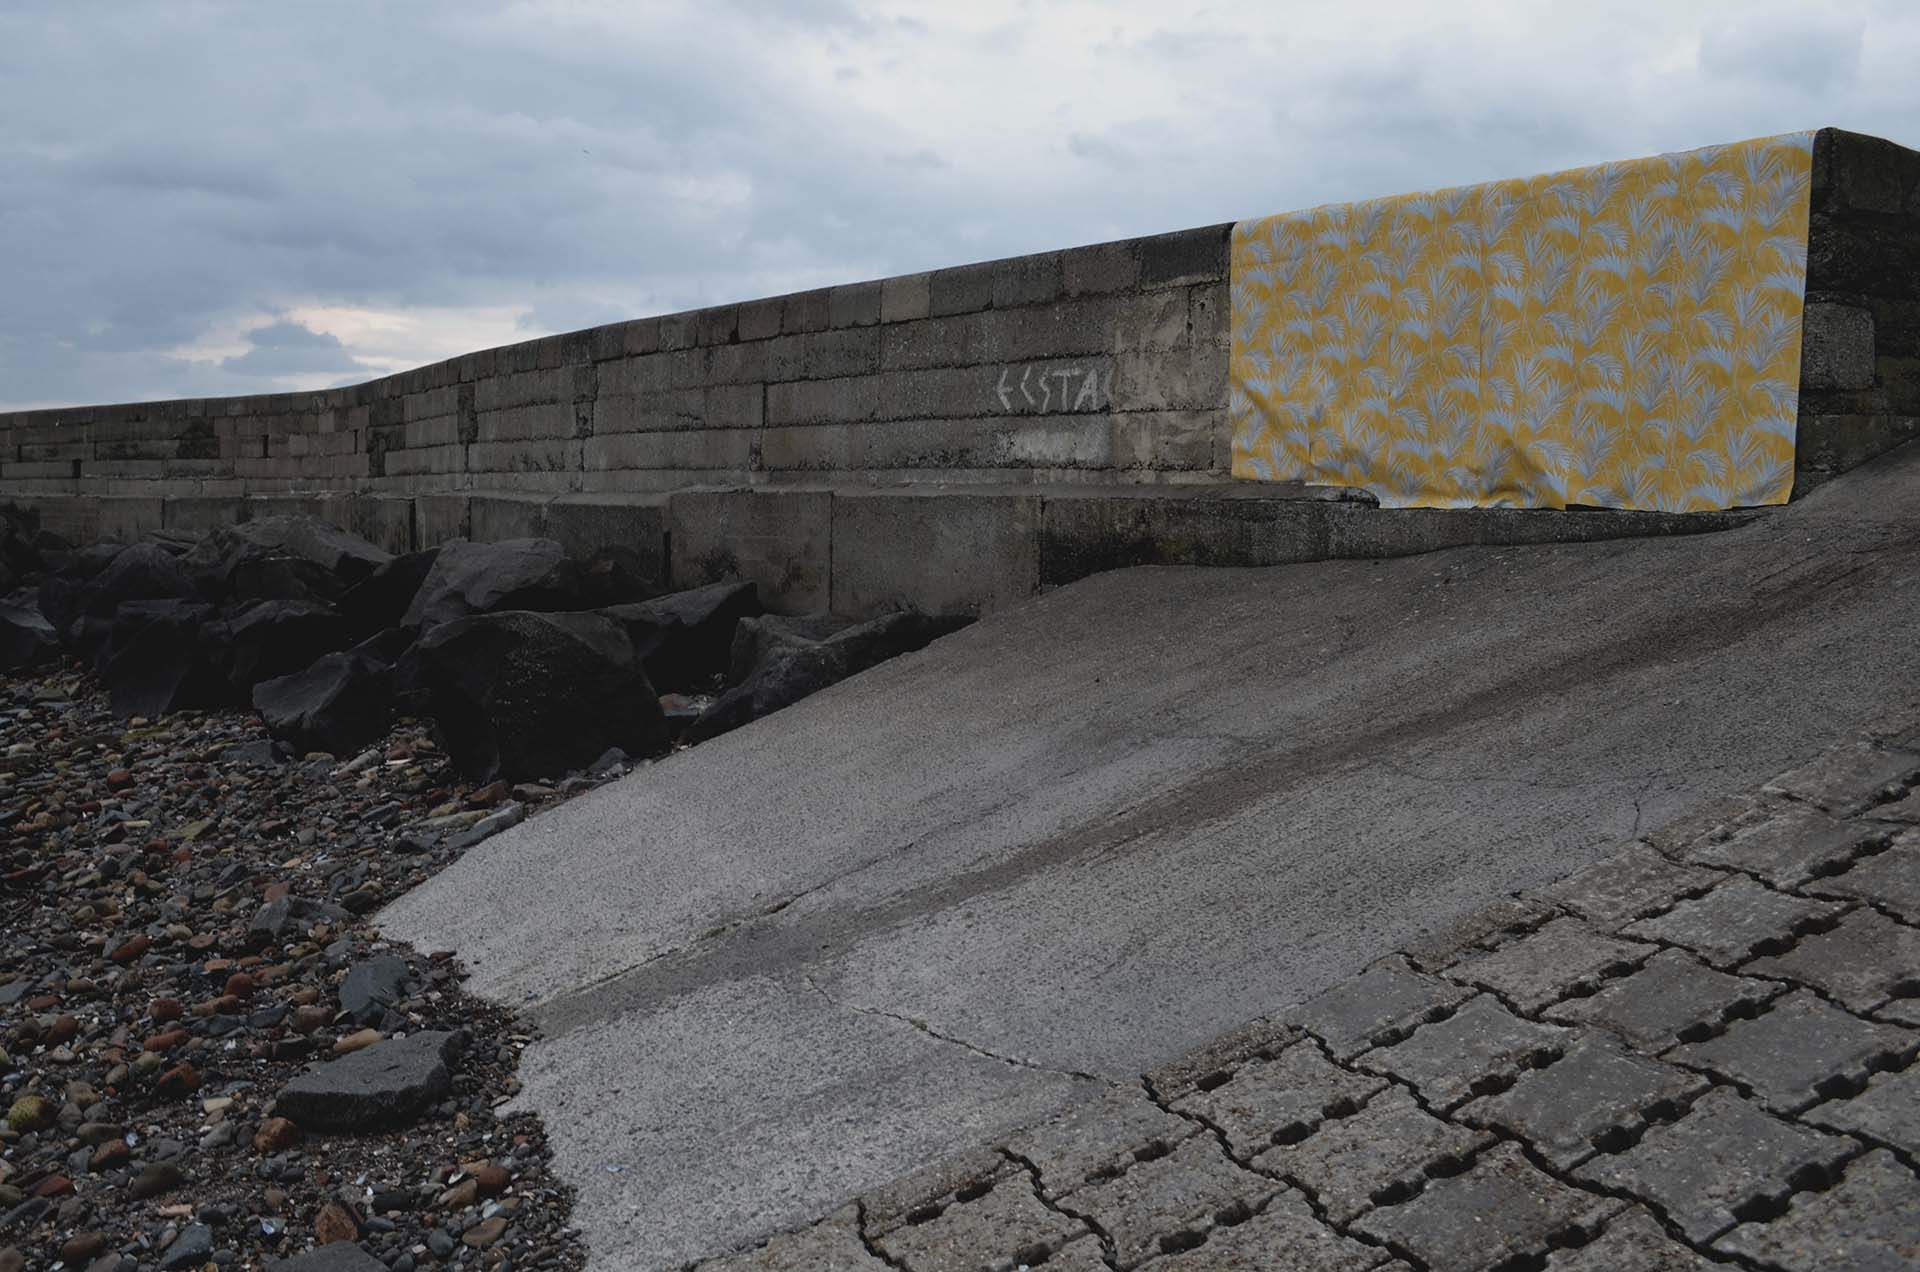 section of outdoor beach wall covered in patterned wallpaper